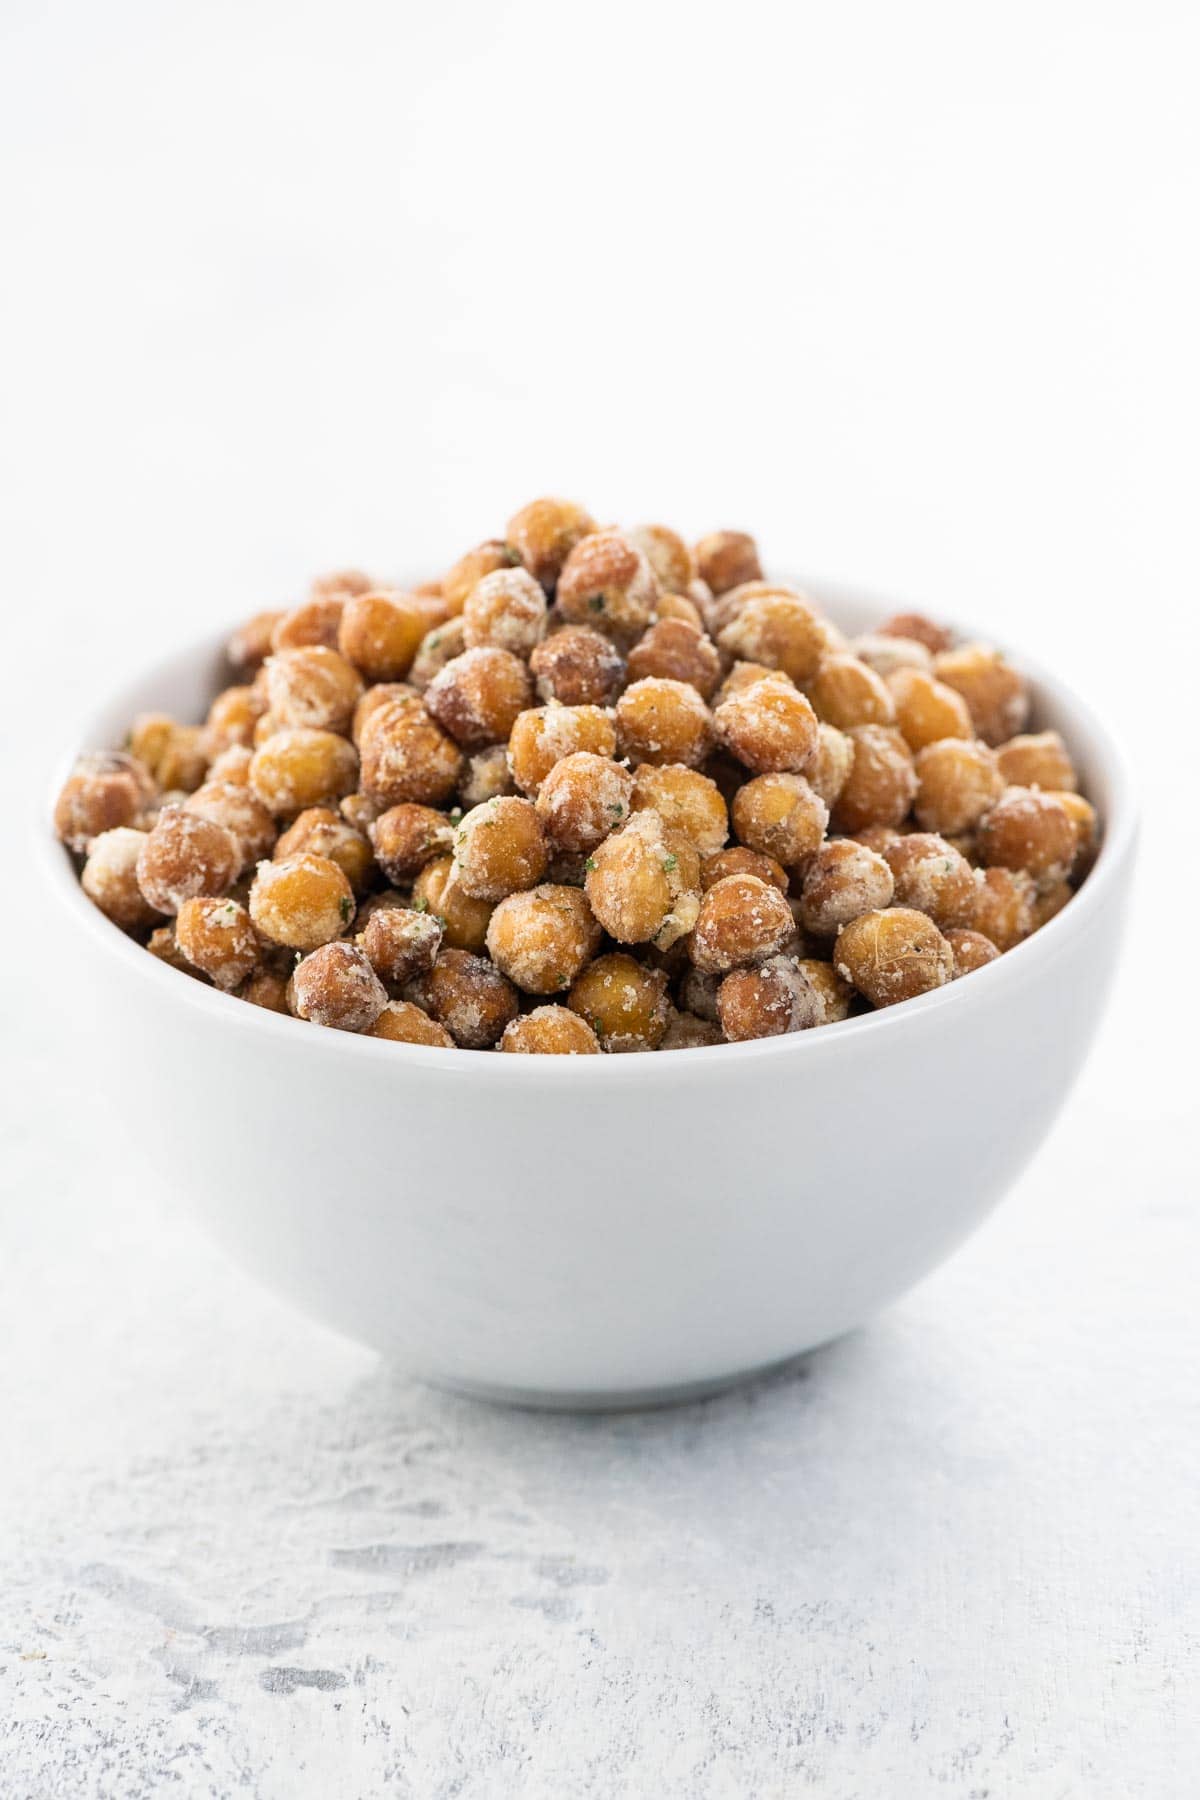 oven roasted chickpeas in a small white bowl